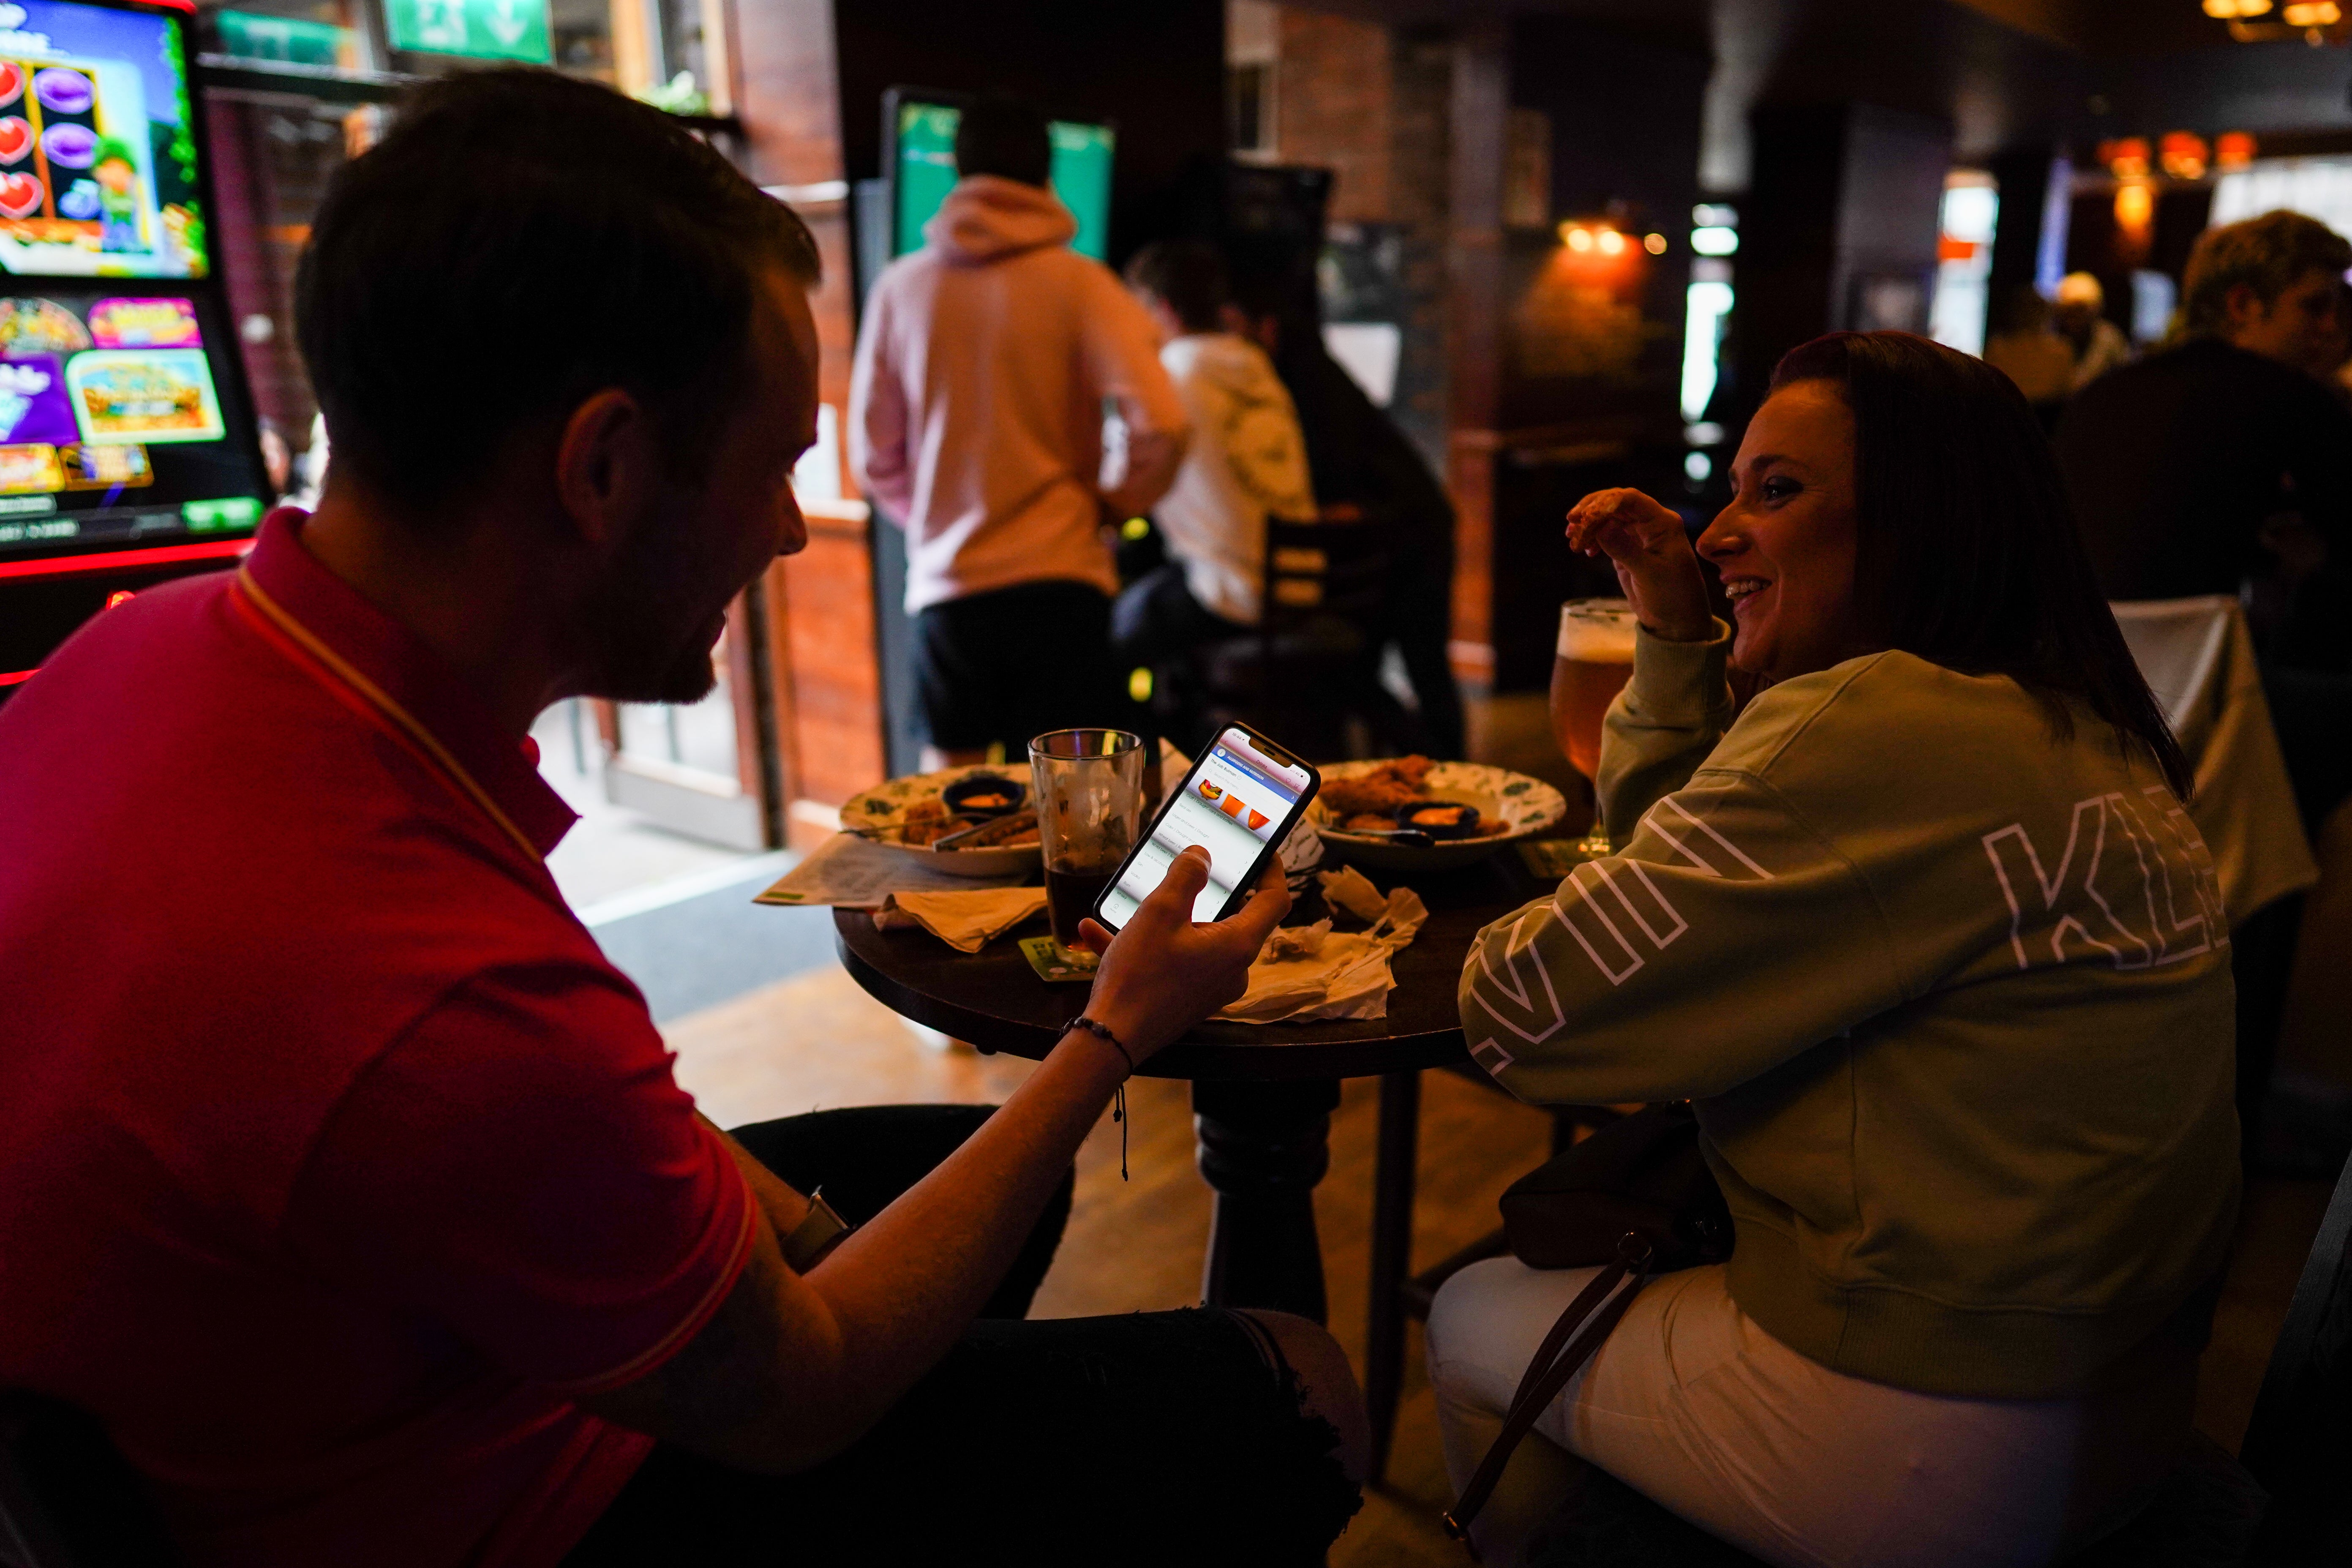 Apps for food and drinks orders in restaurants and pubs have become increasingly popular during the pandemic